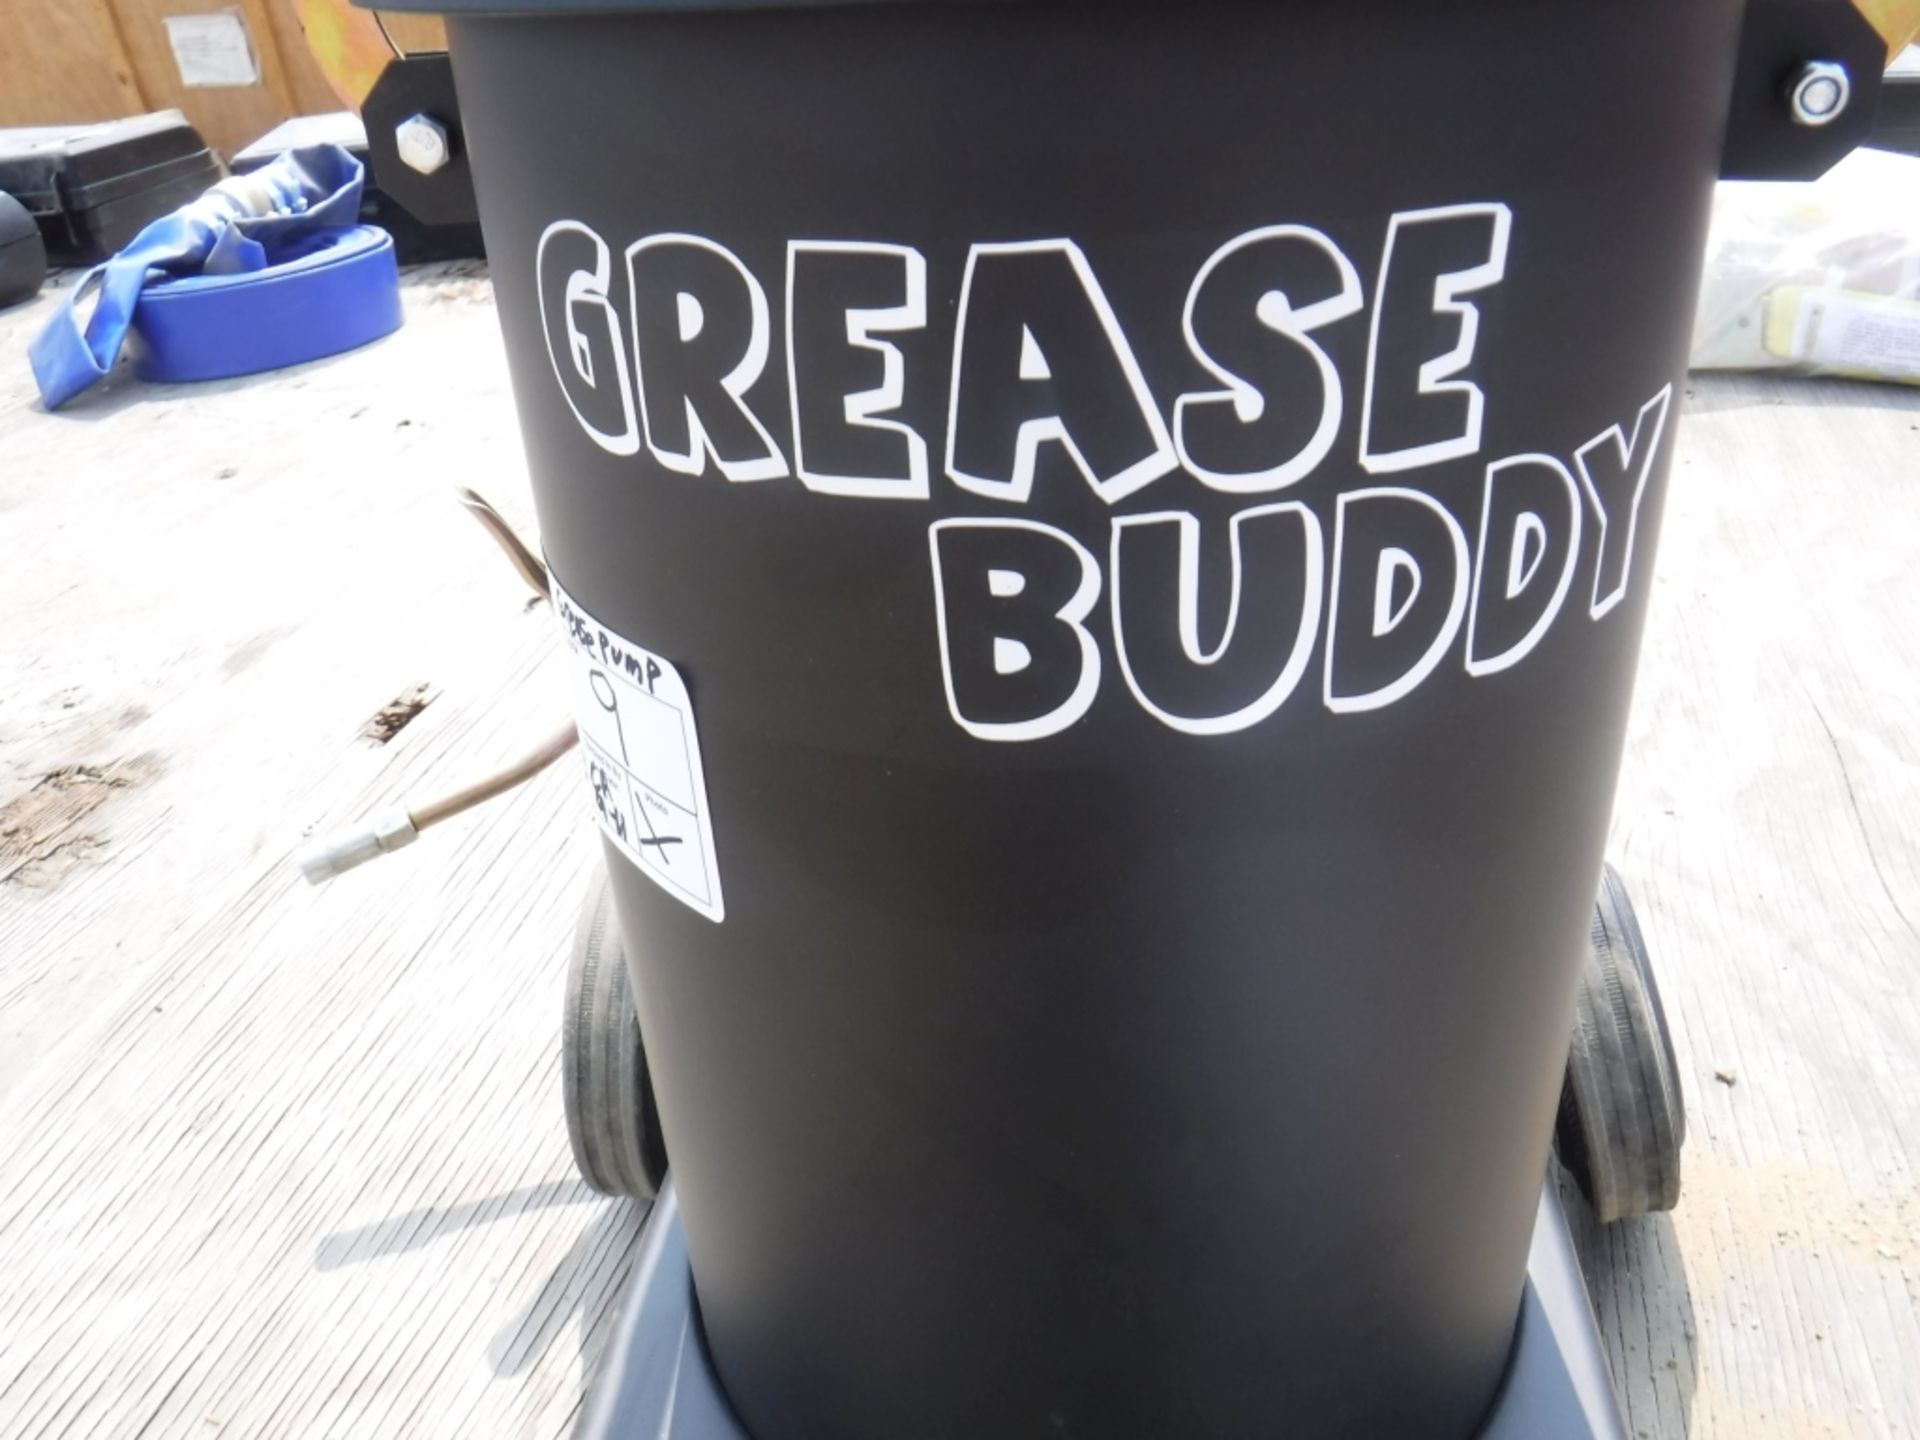 Unused 2020 Grease Buddy Pneumatic Grease Pump. - Image 6 of 6